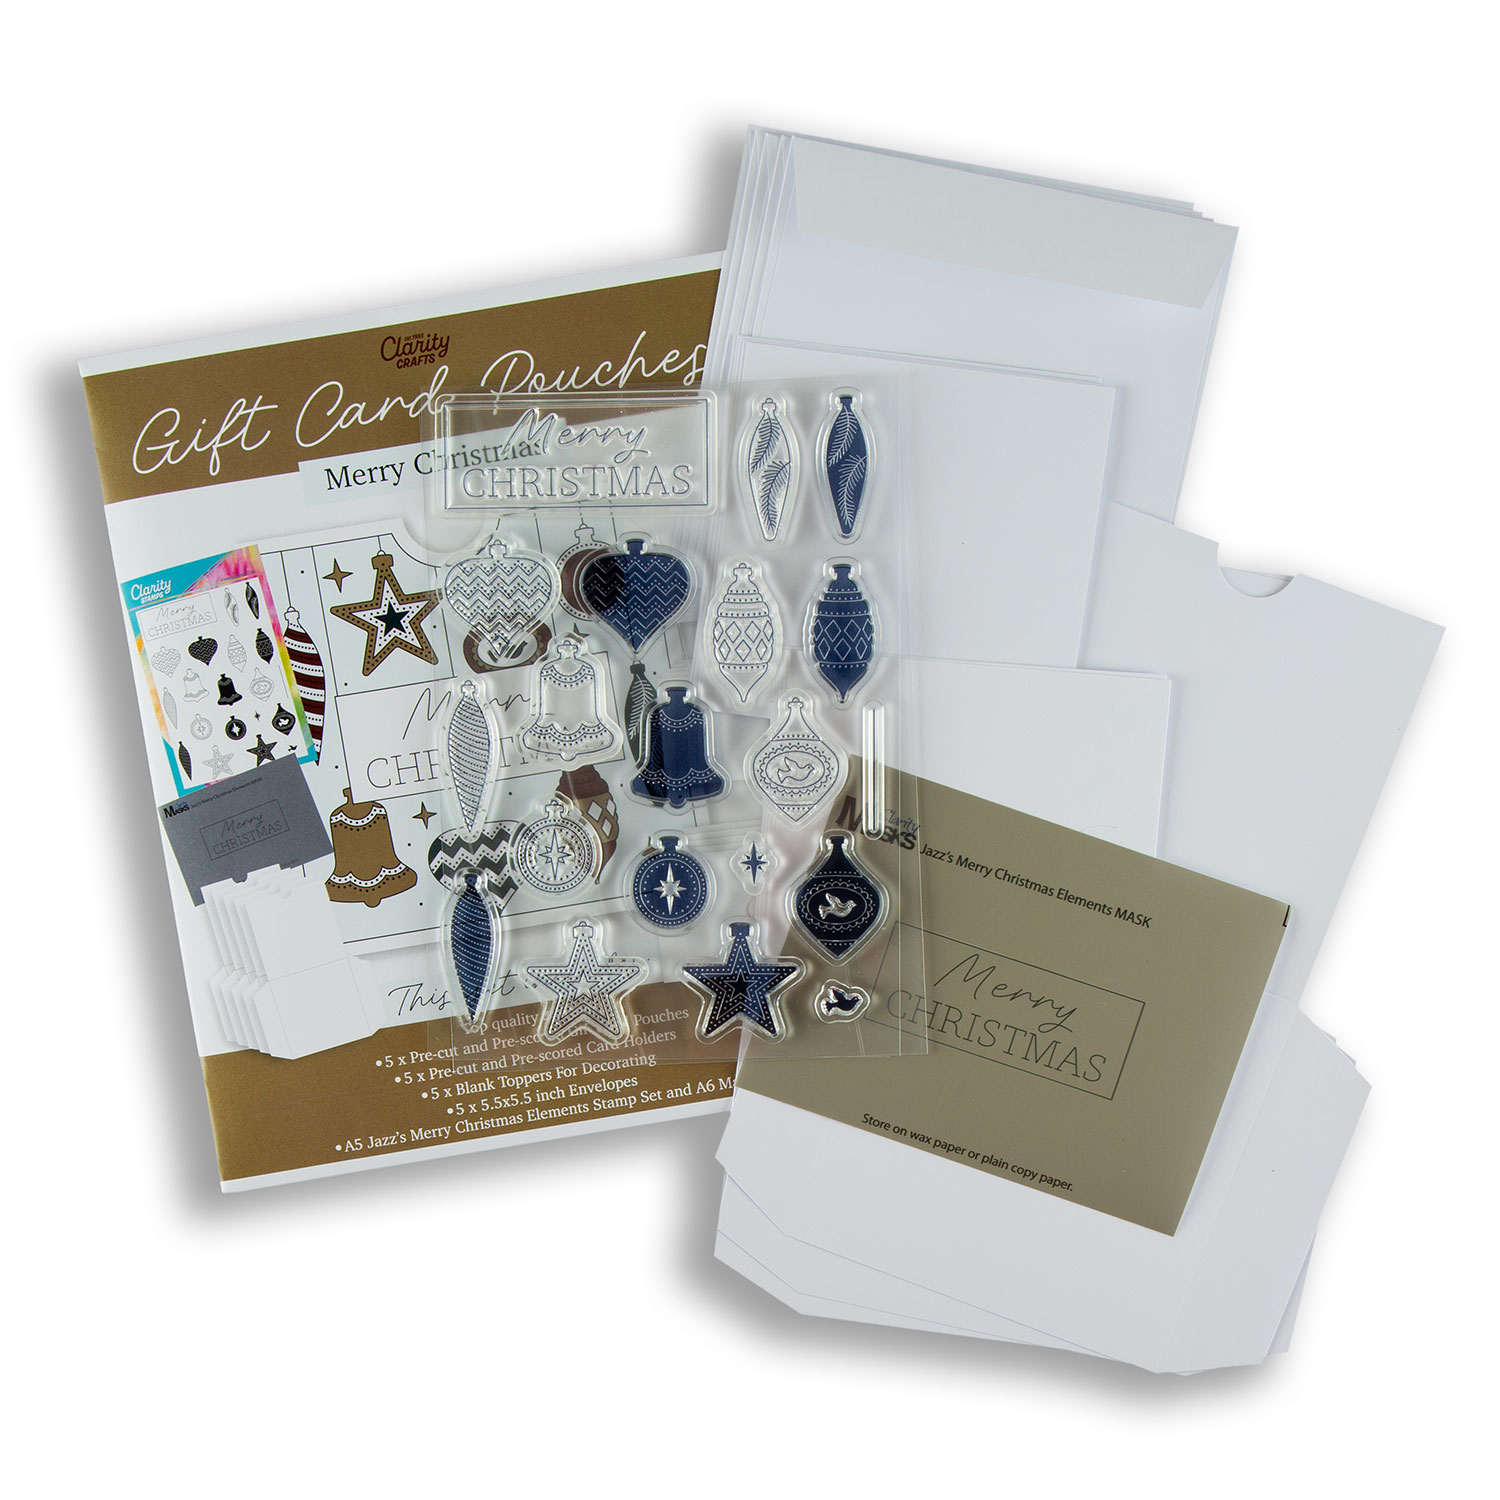 Clarity Crafts Voucher Pouch A5 Stamp & A6 Mask Set with Die Cut Wallets & Envelopes Pick-n-Mix - Choose 2 - Jazz's Merry Christmas Elements